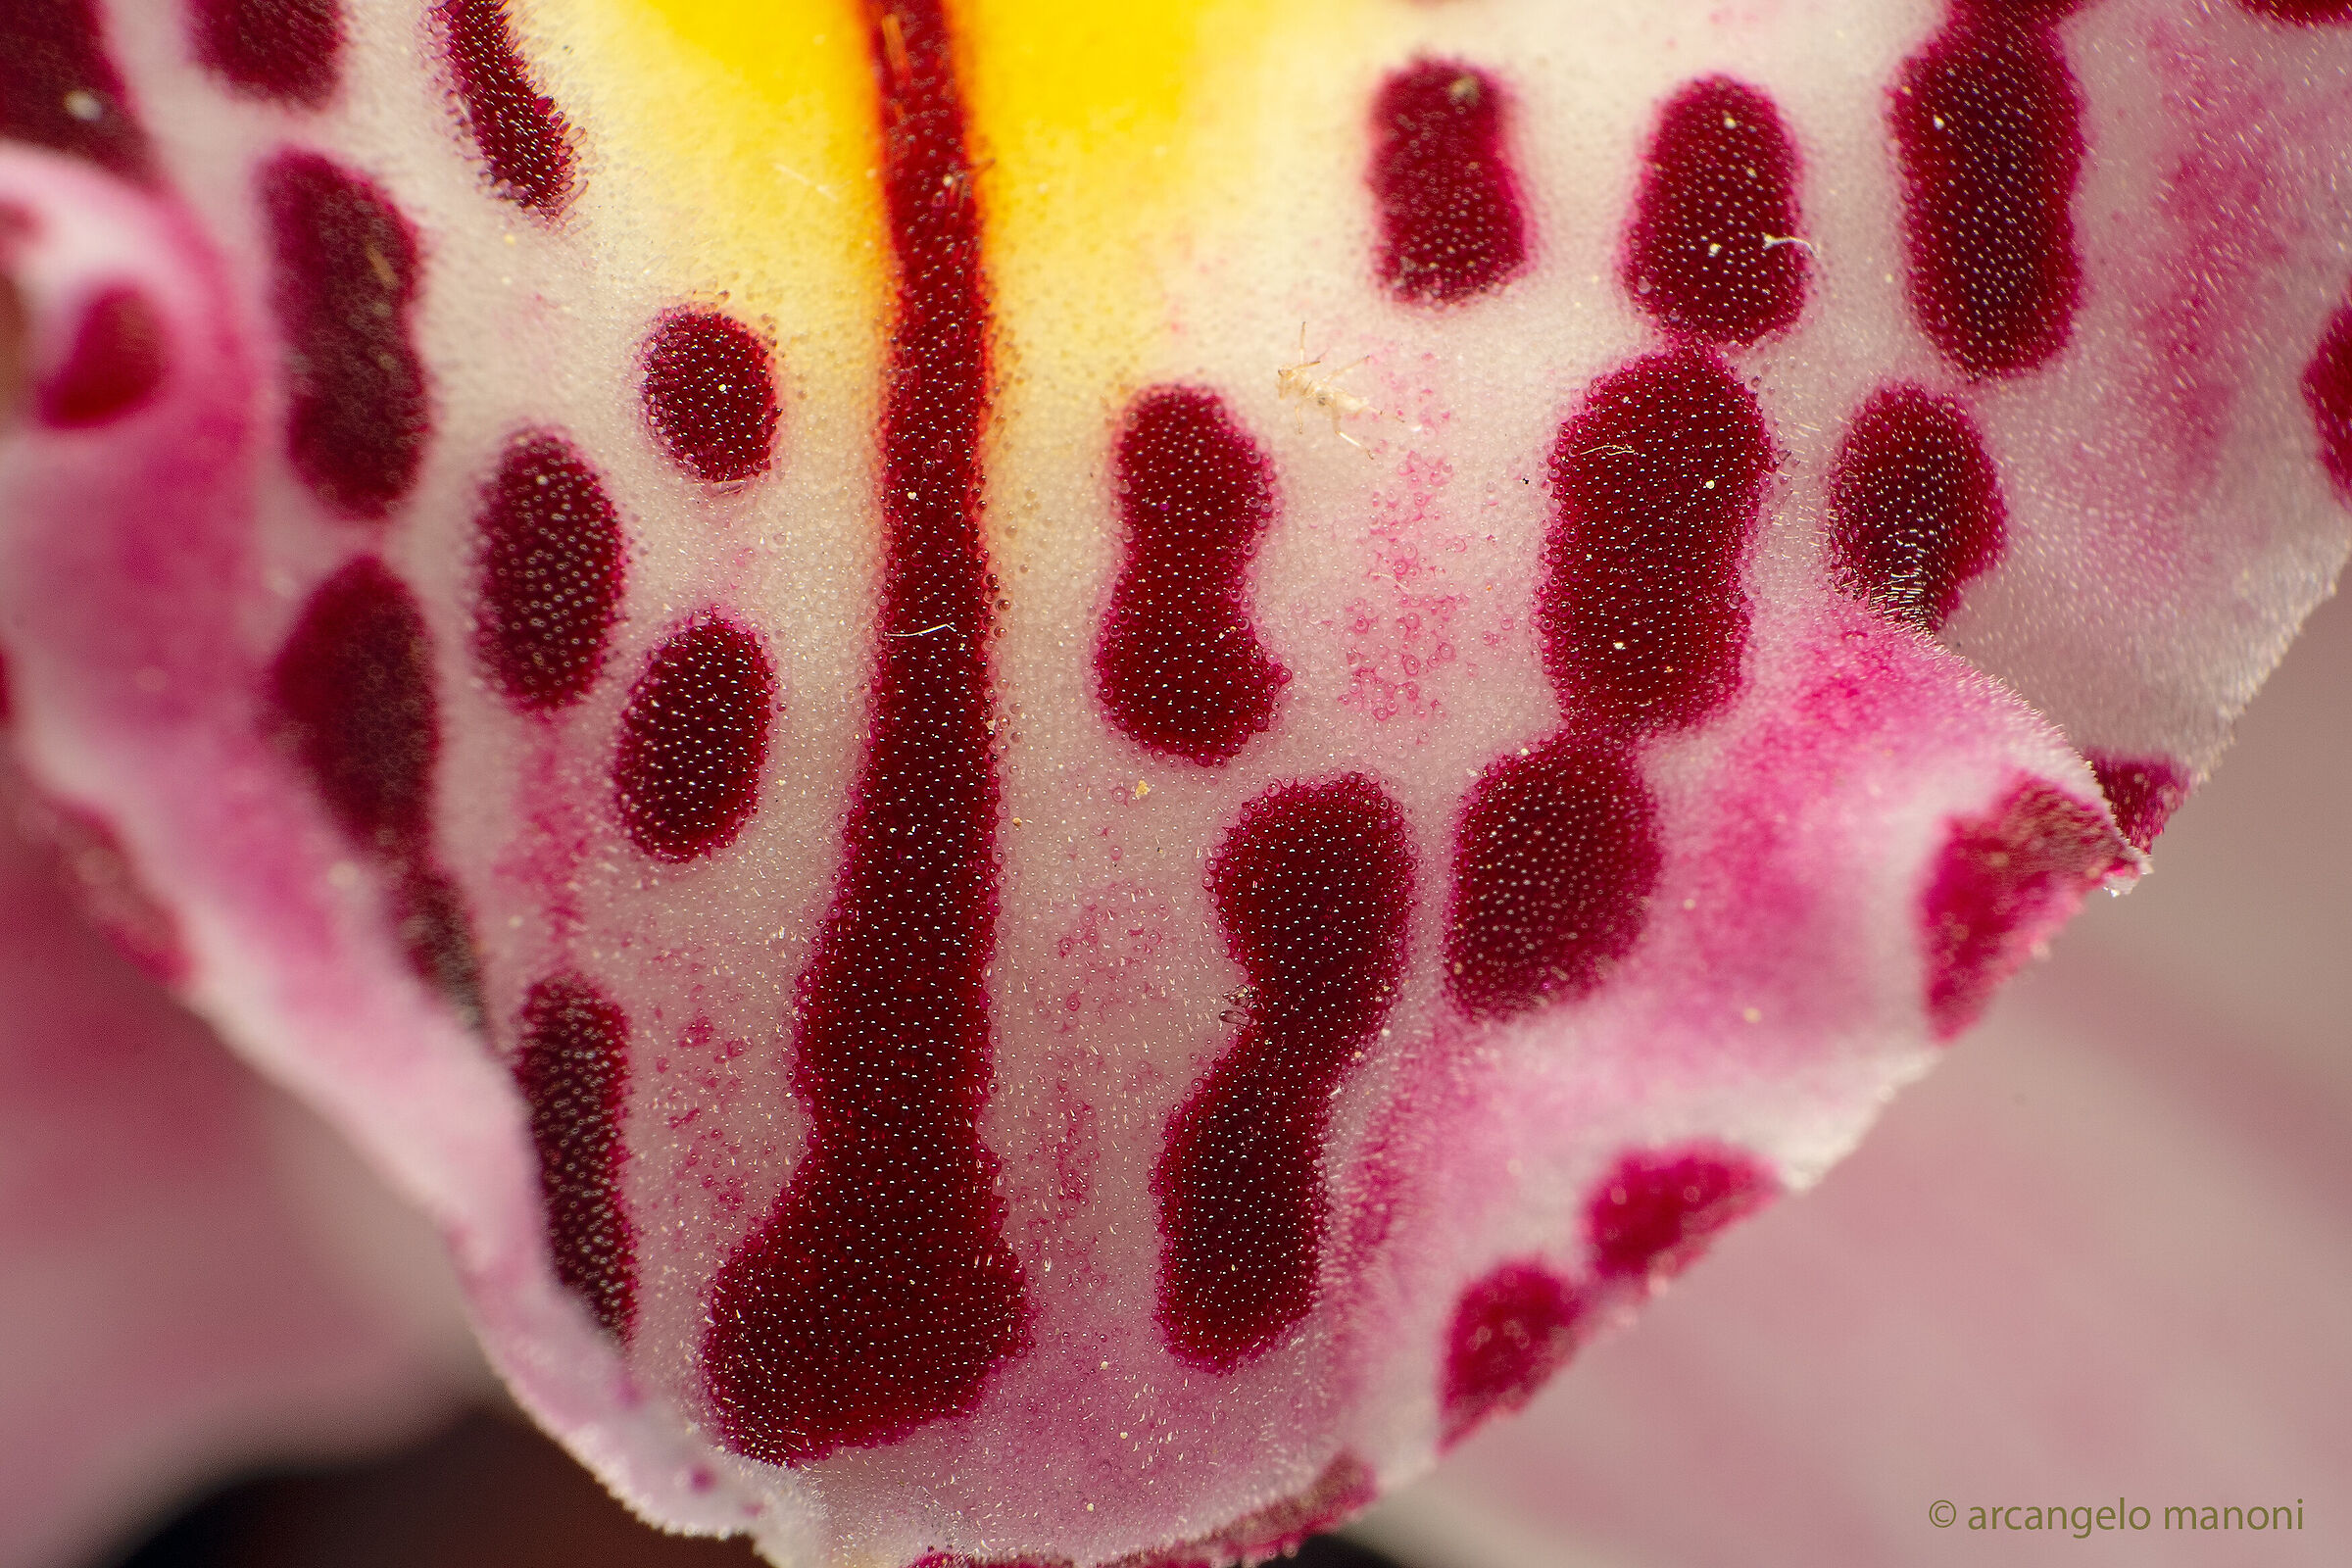 the fabric of the orchid...